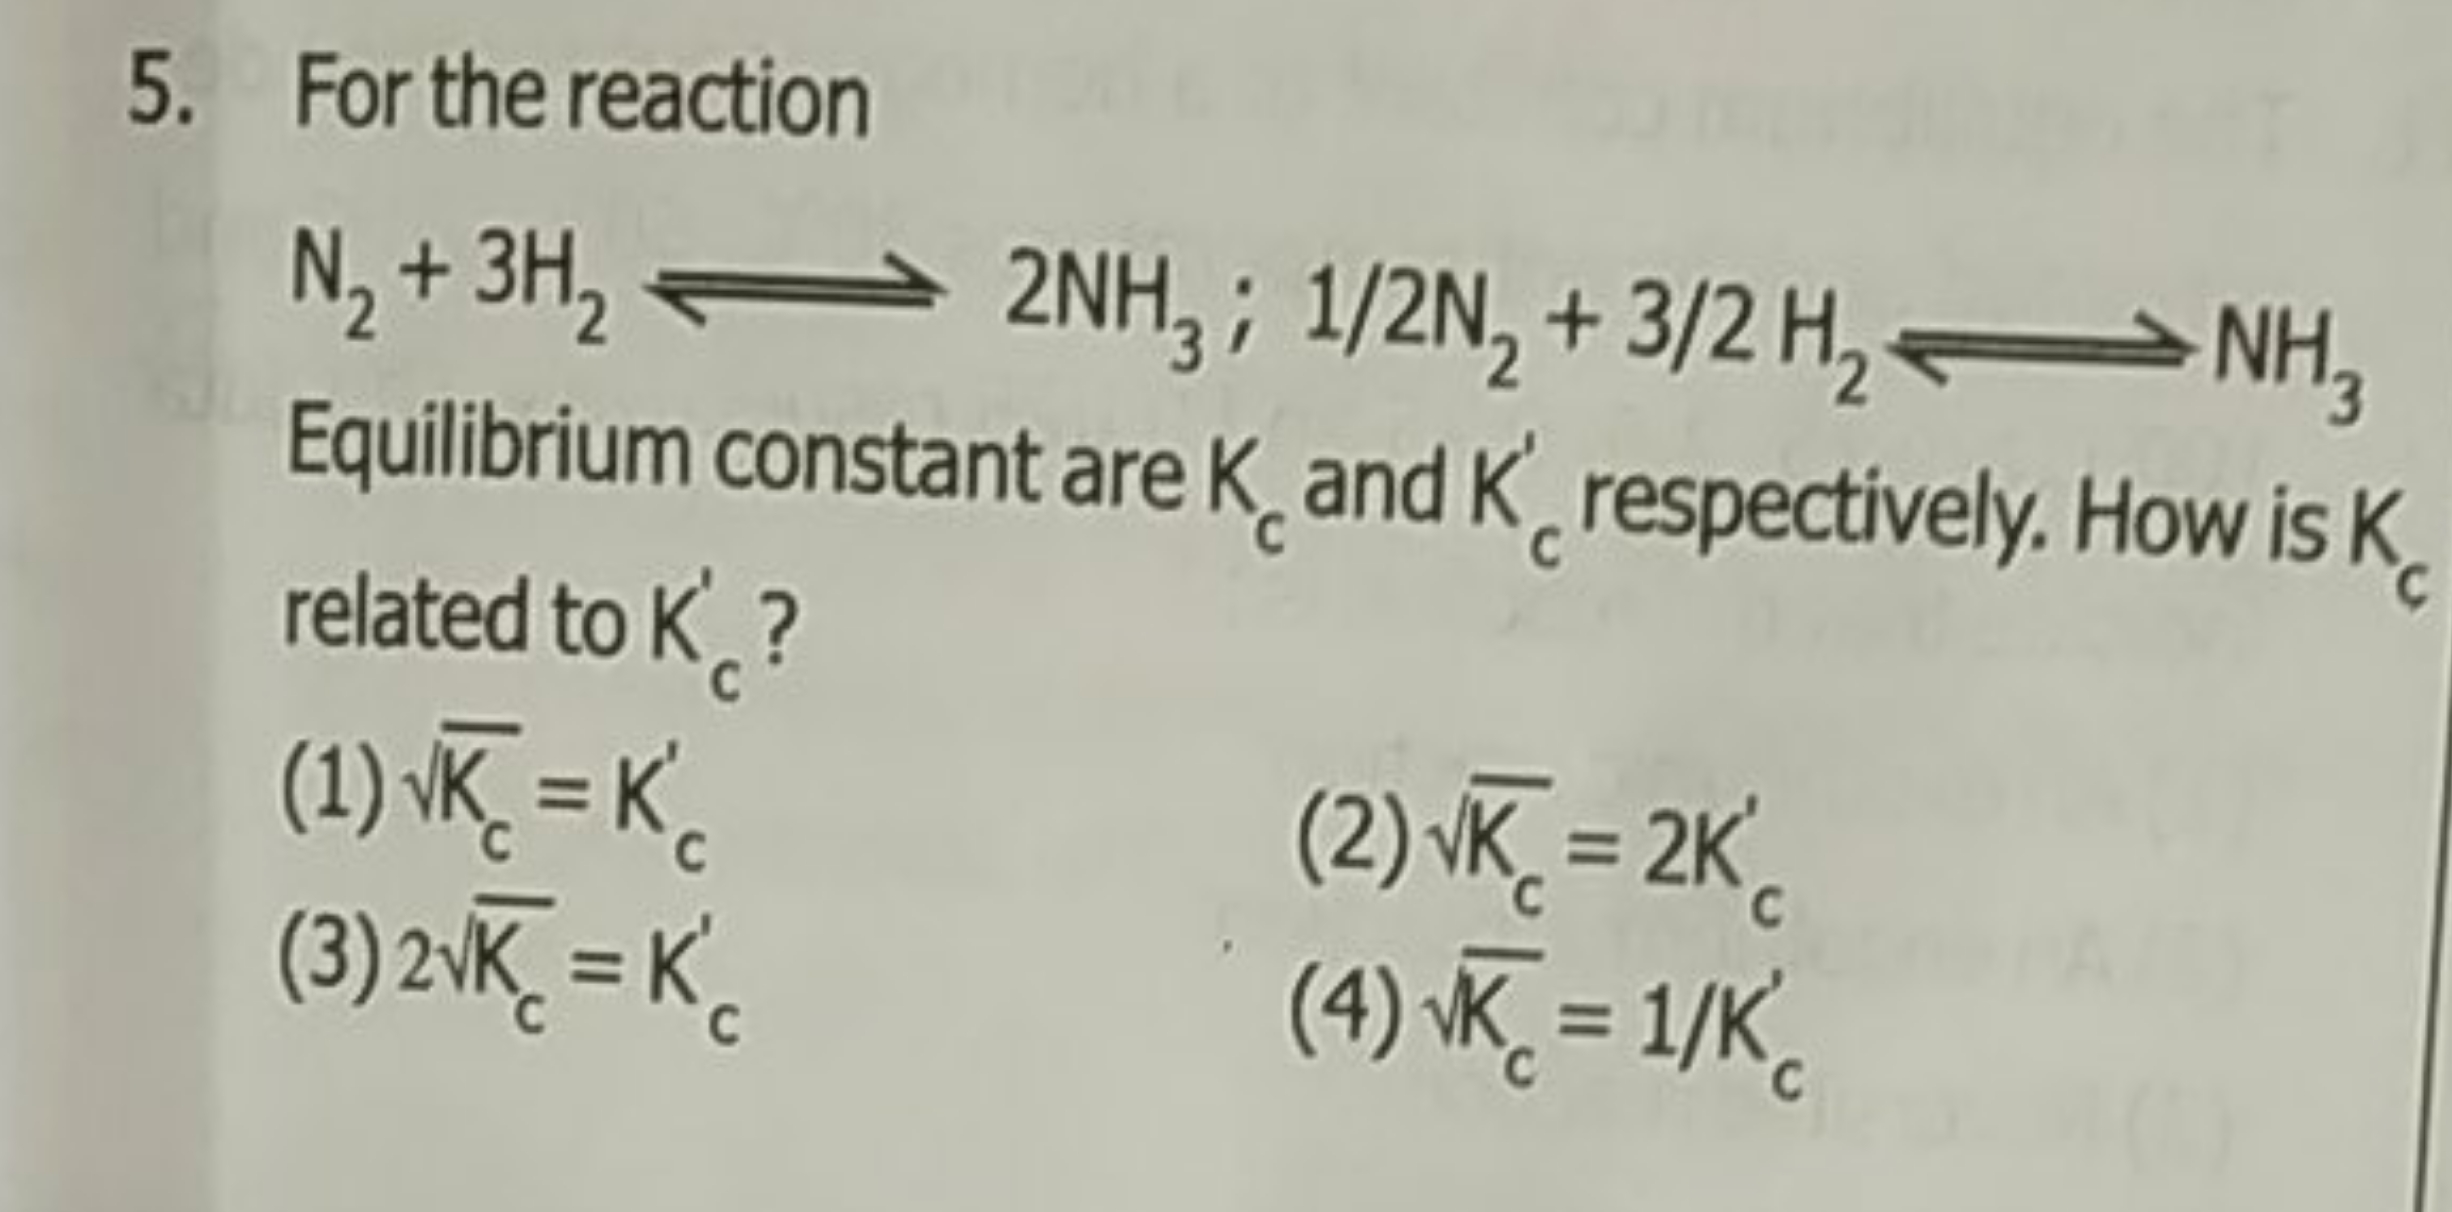 5. For the reaction
N2​+3H2​⇌2NH3​;1/2 N2​+3/2H2​⇌NH3​

Equilibrium co